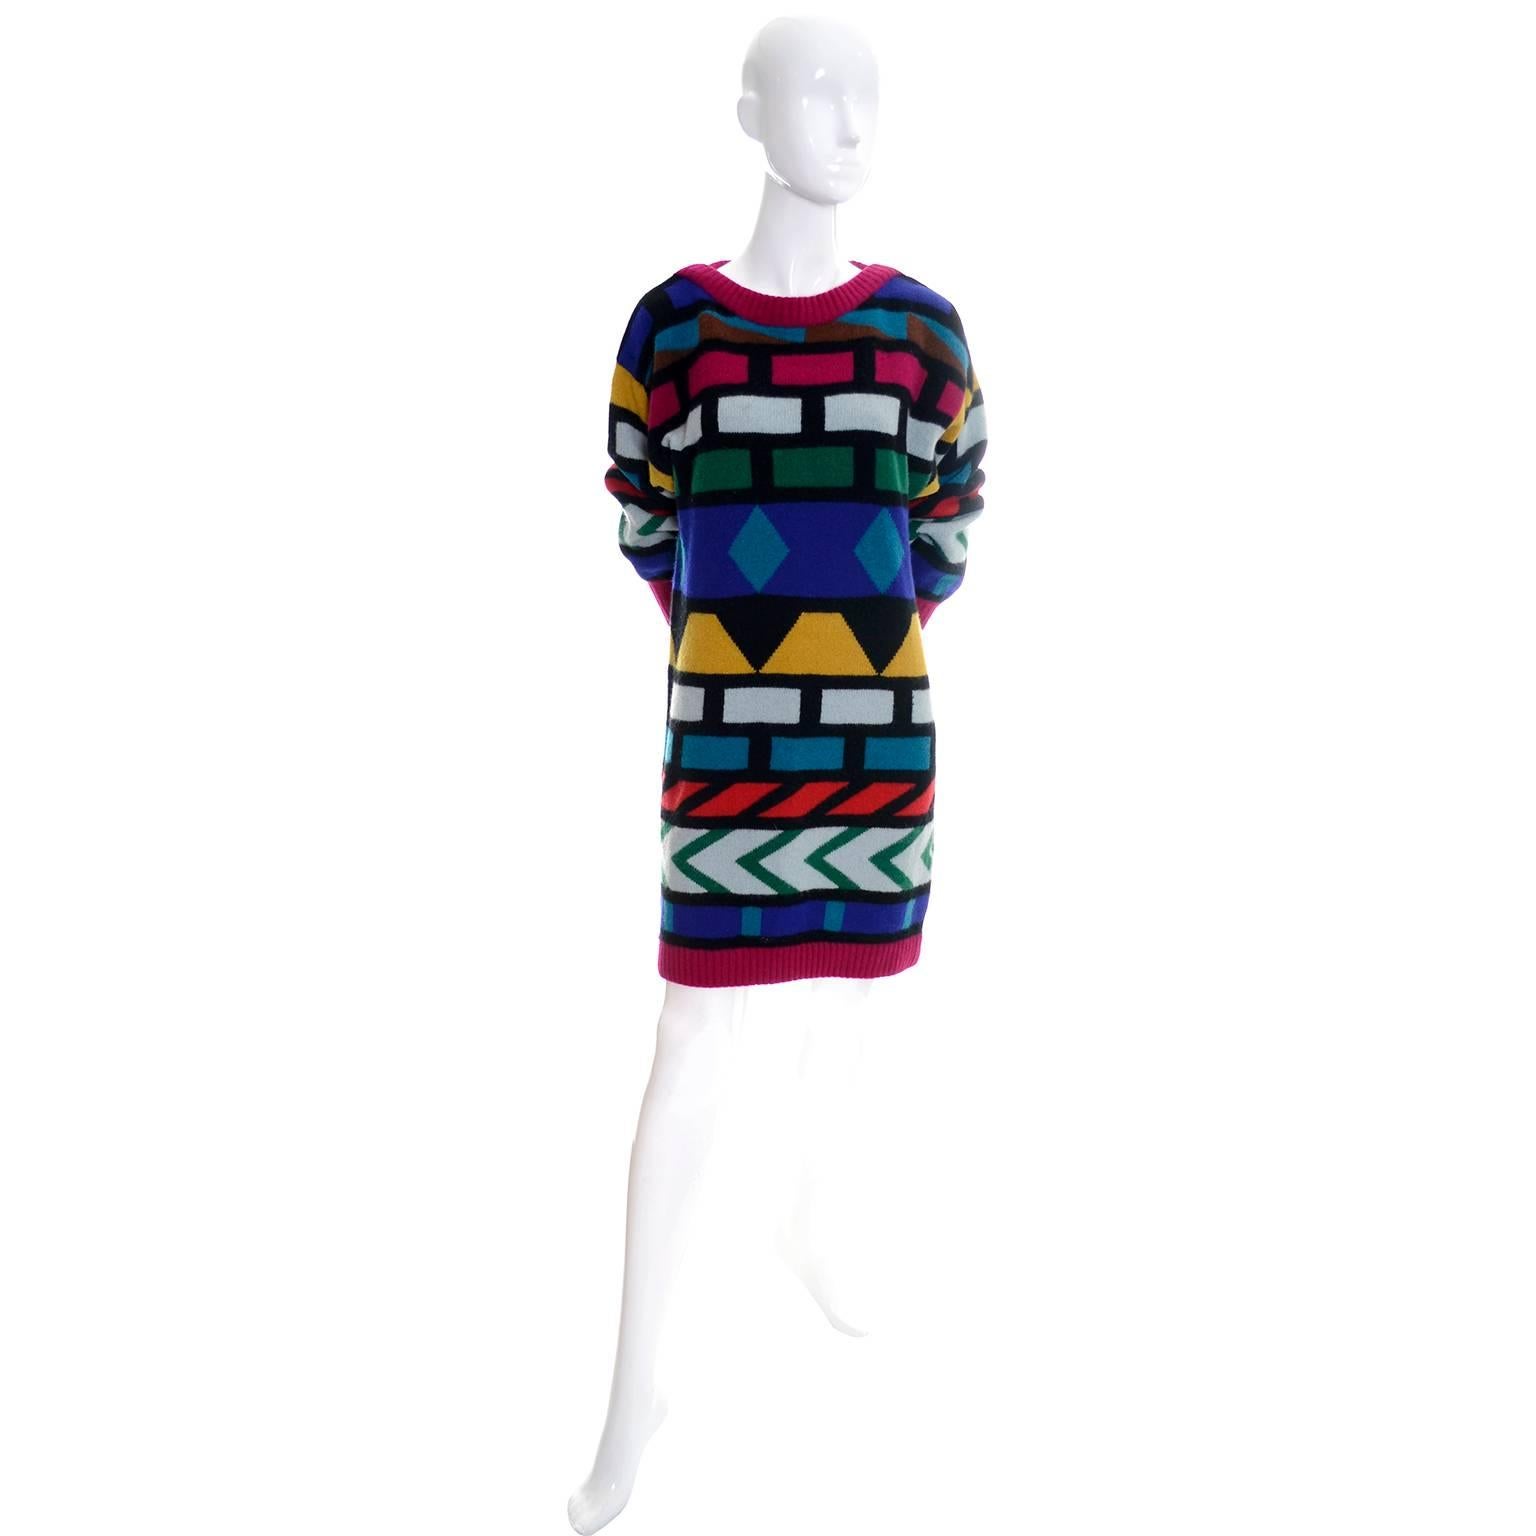 This is a great tunic style vintage sweater dress from Krizia from the 1980's.  The dress has drop shoulders and is made of Angora, wool, and nylon in shades of red, teal, yellow, pale gray, blue, green, black and raspberry.  You can wear it as a